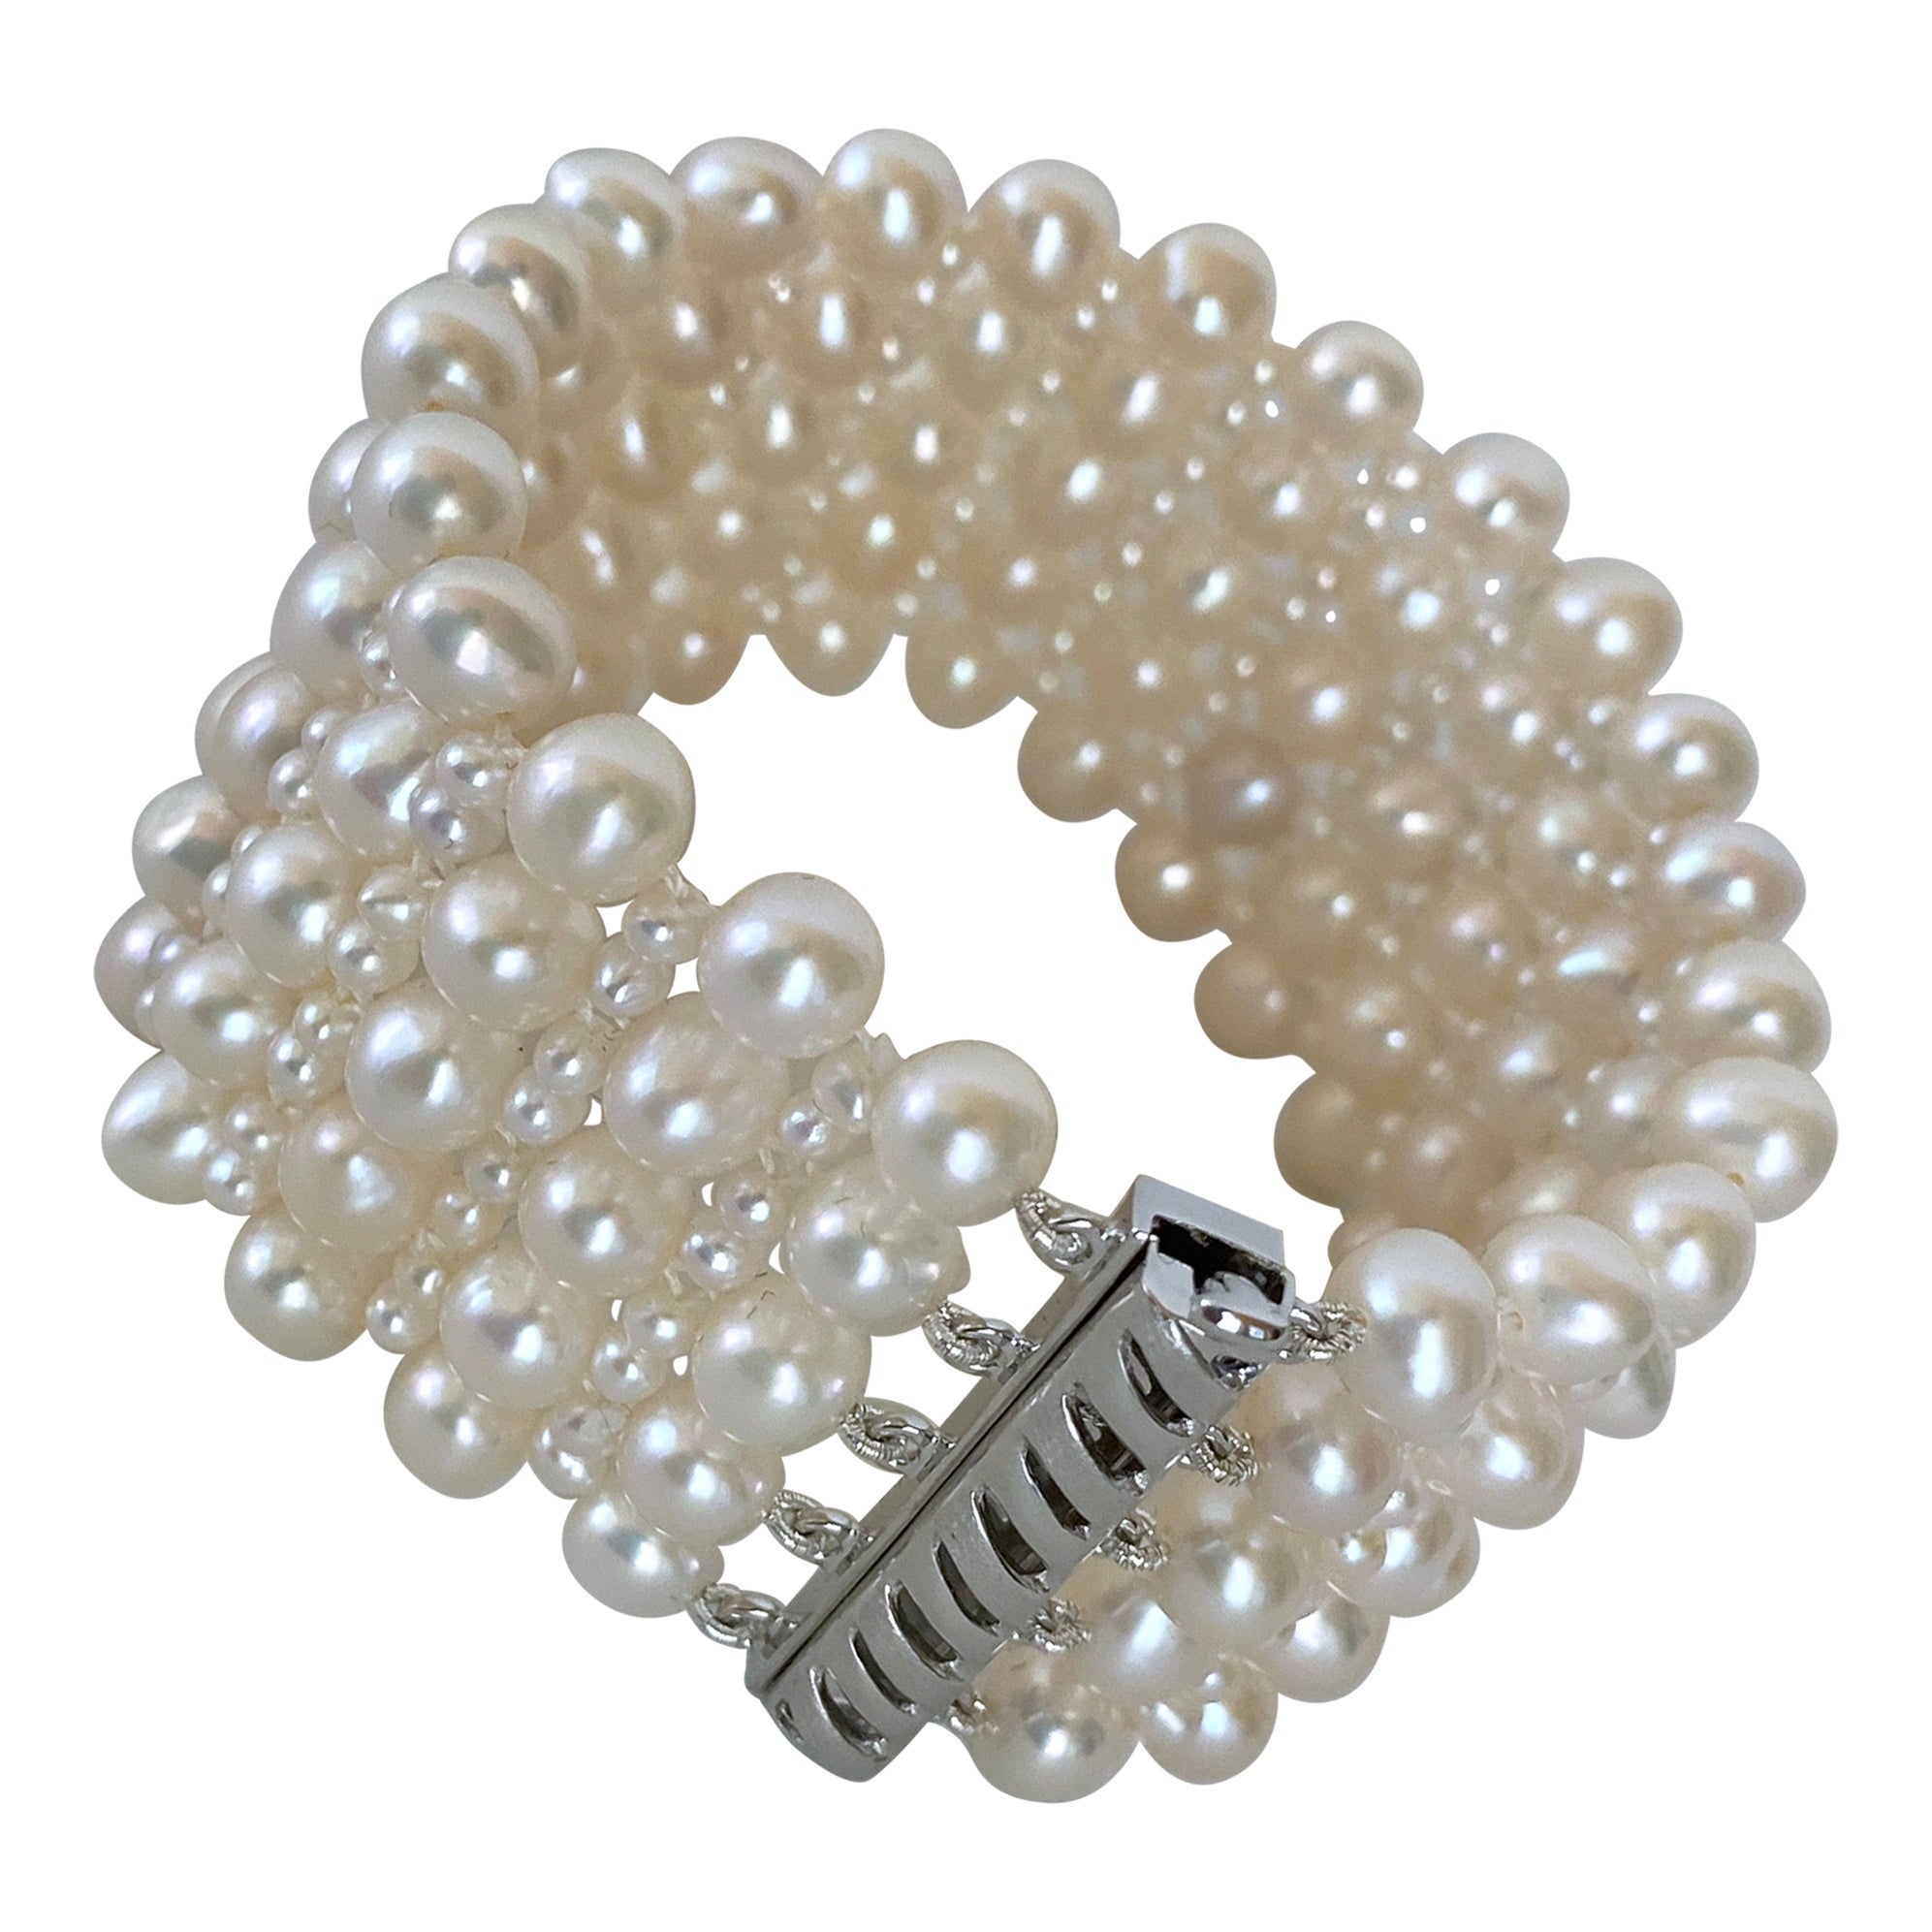 Marina J. Woven Pearl Wedding Bracelet with Rhodium Plated Silver Clasp For Sale